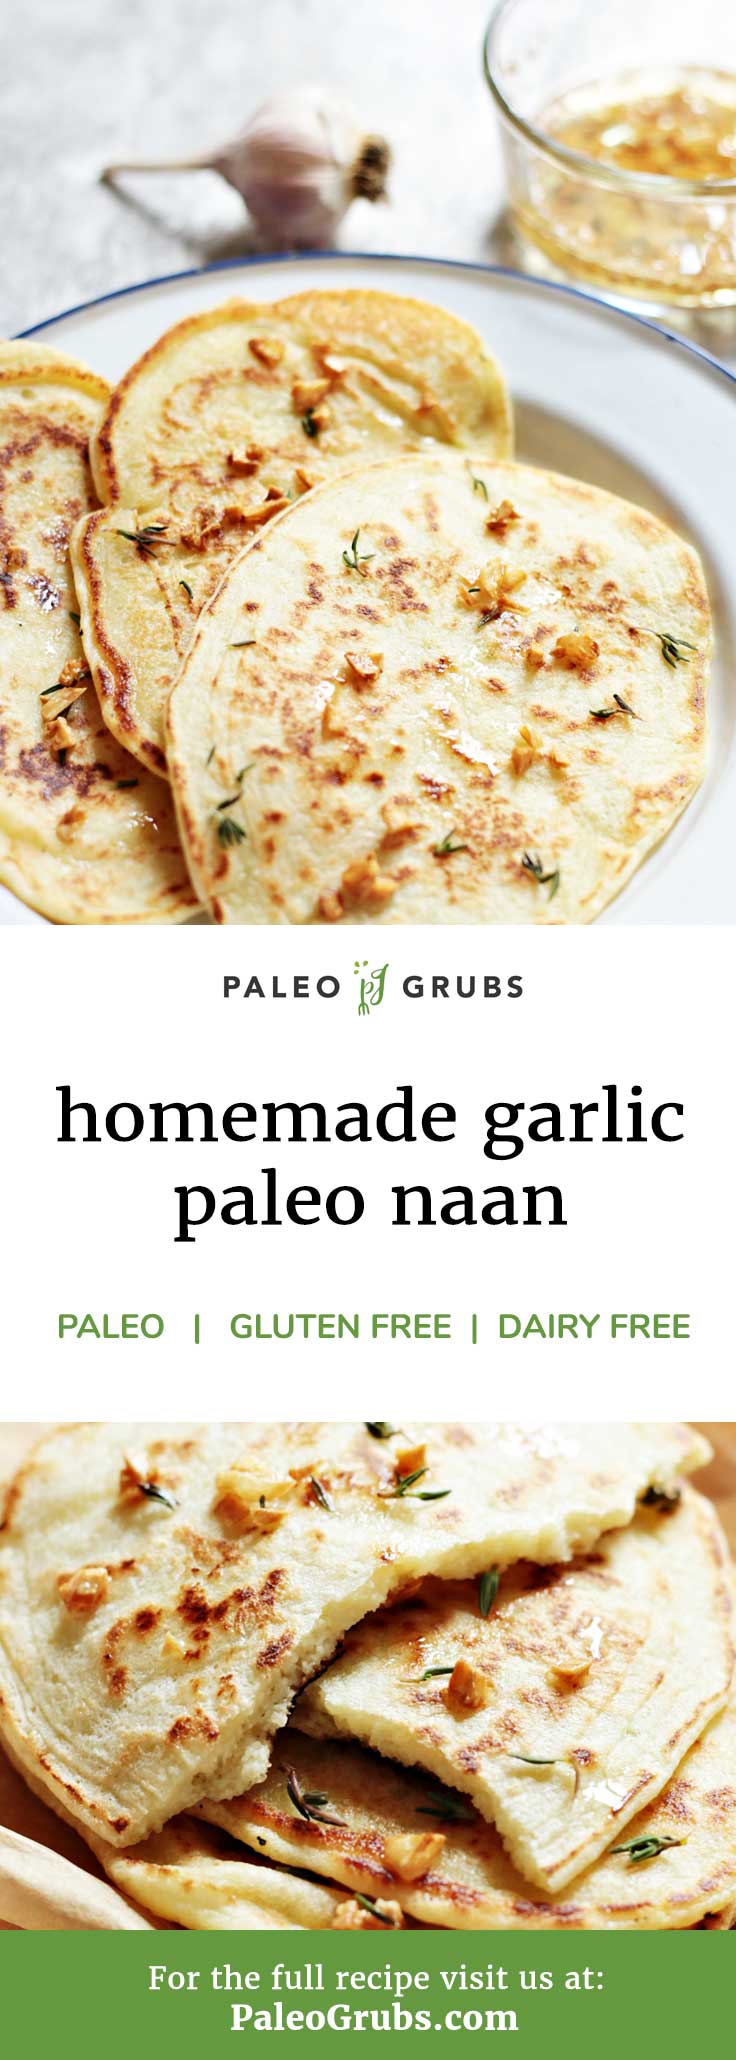 This is the best naan bread I have ever had! Definitely try this easy recipe.